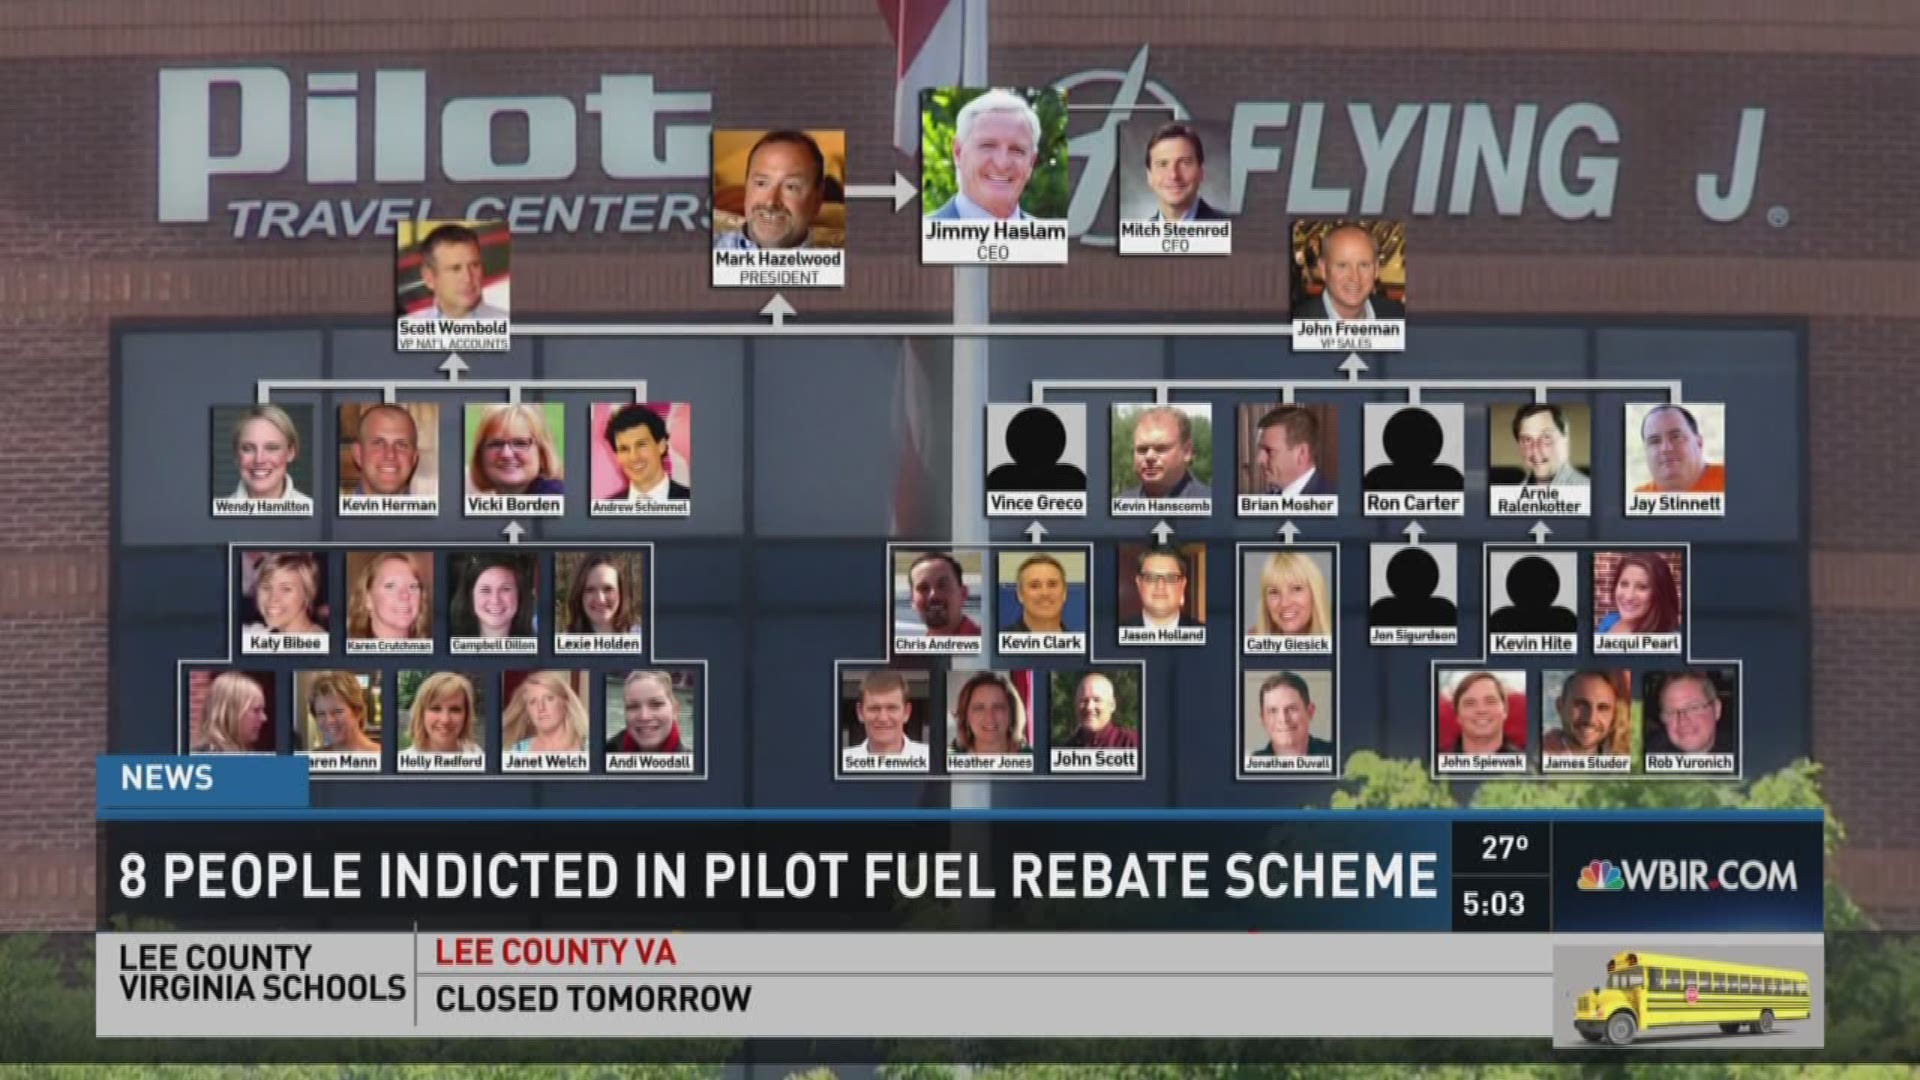 2/9/16/. 5 pm. A federal grand jury has indicted eight former and current Pilot Flying J employees - including the former president - for their alleged roles in a diesel fuel rebate scheme that authorities say helped line their own pockets and enrich the